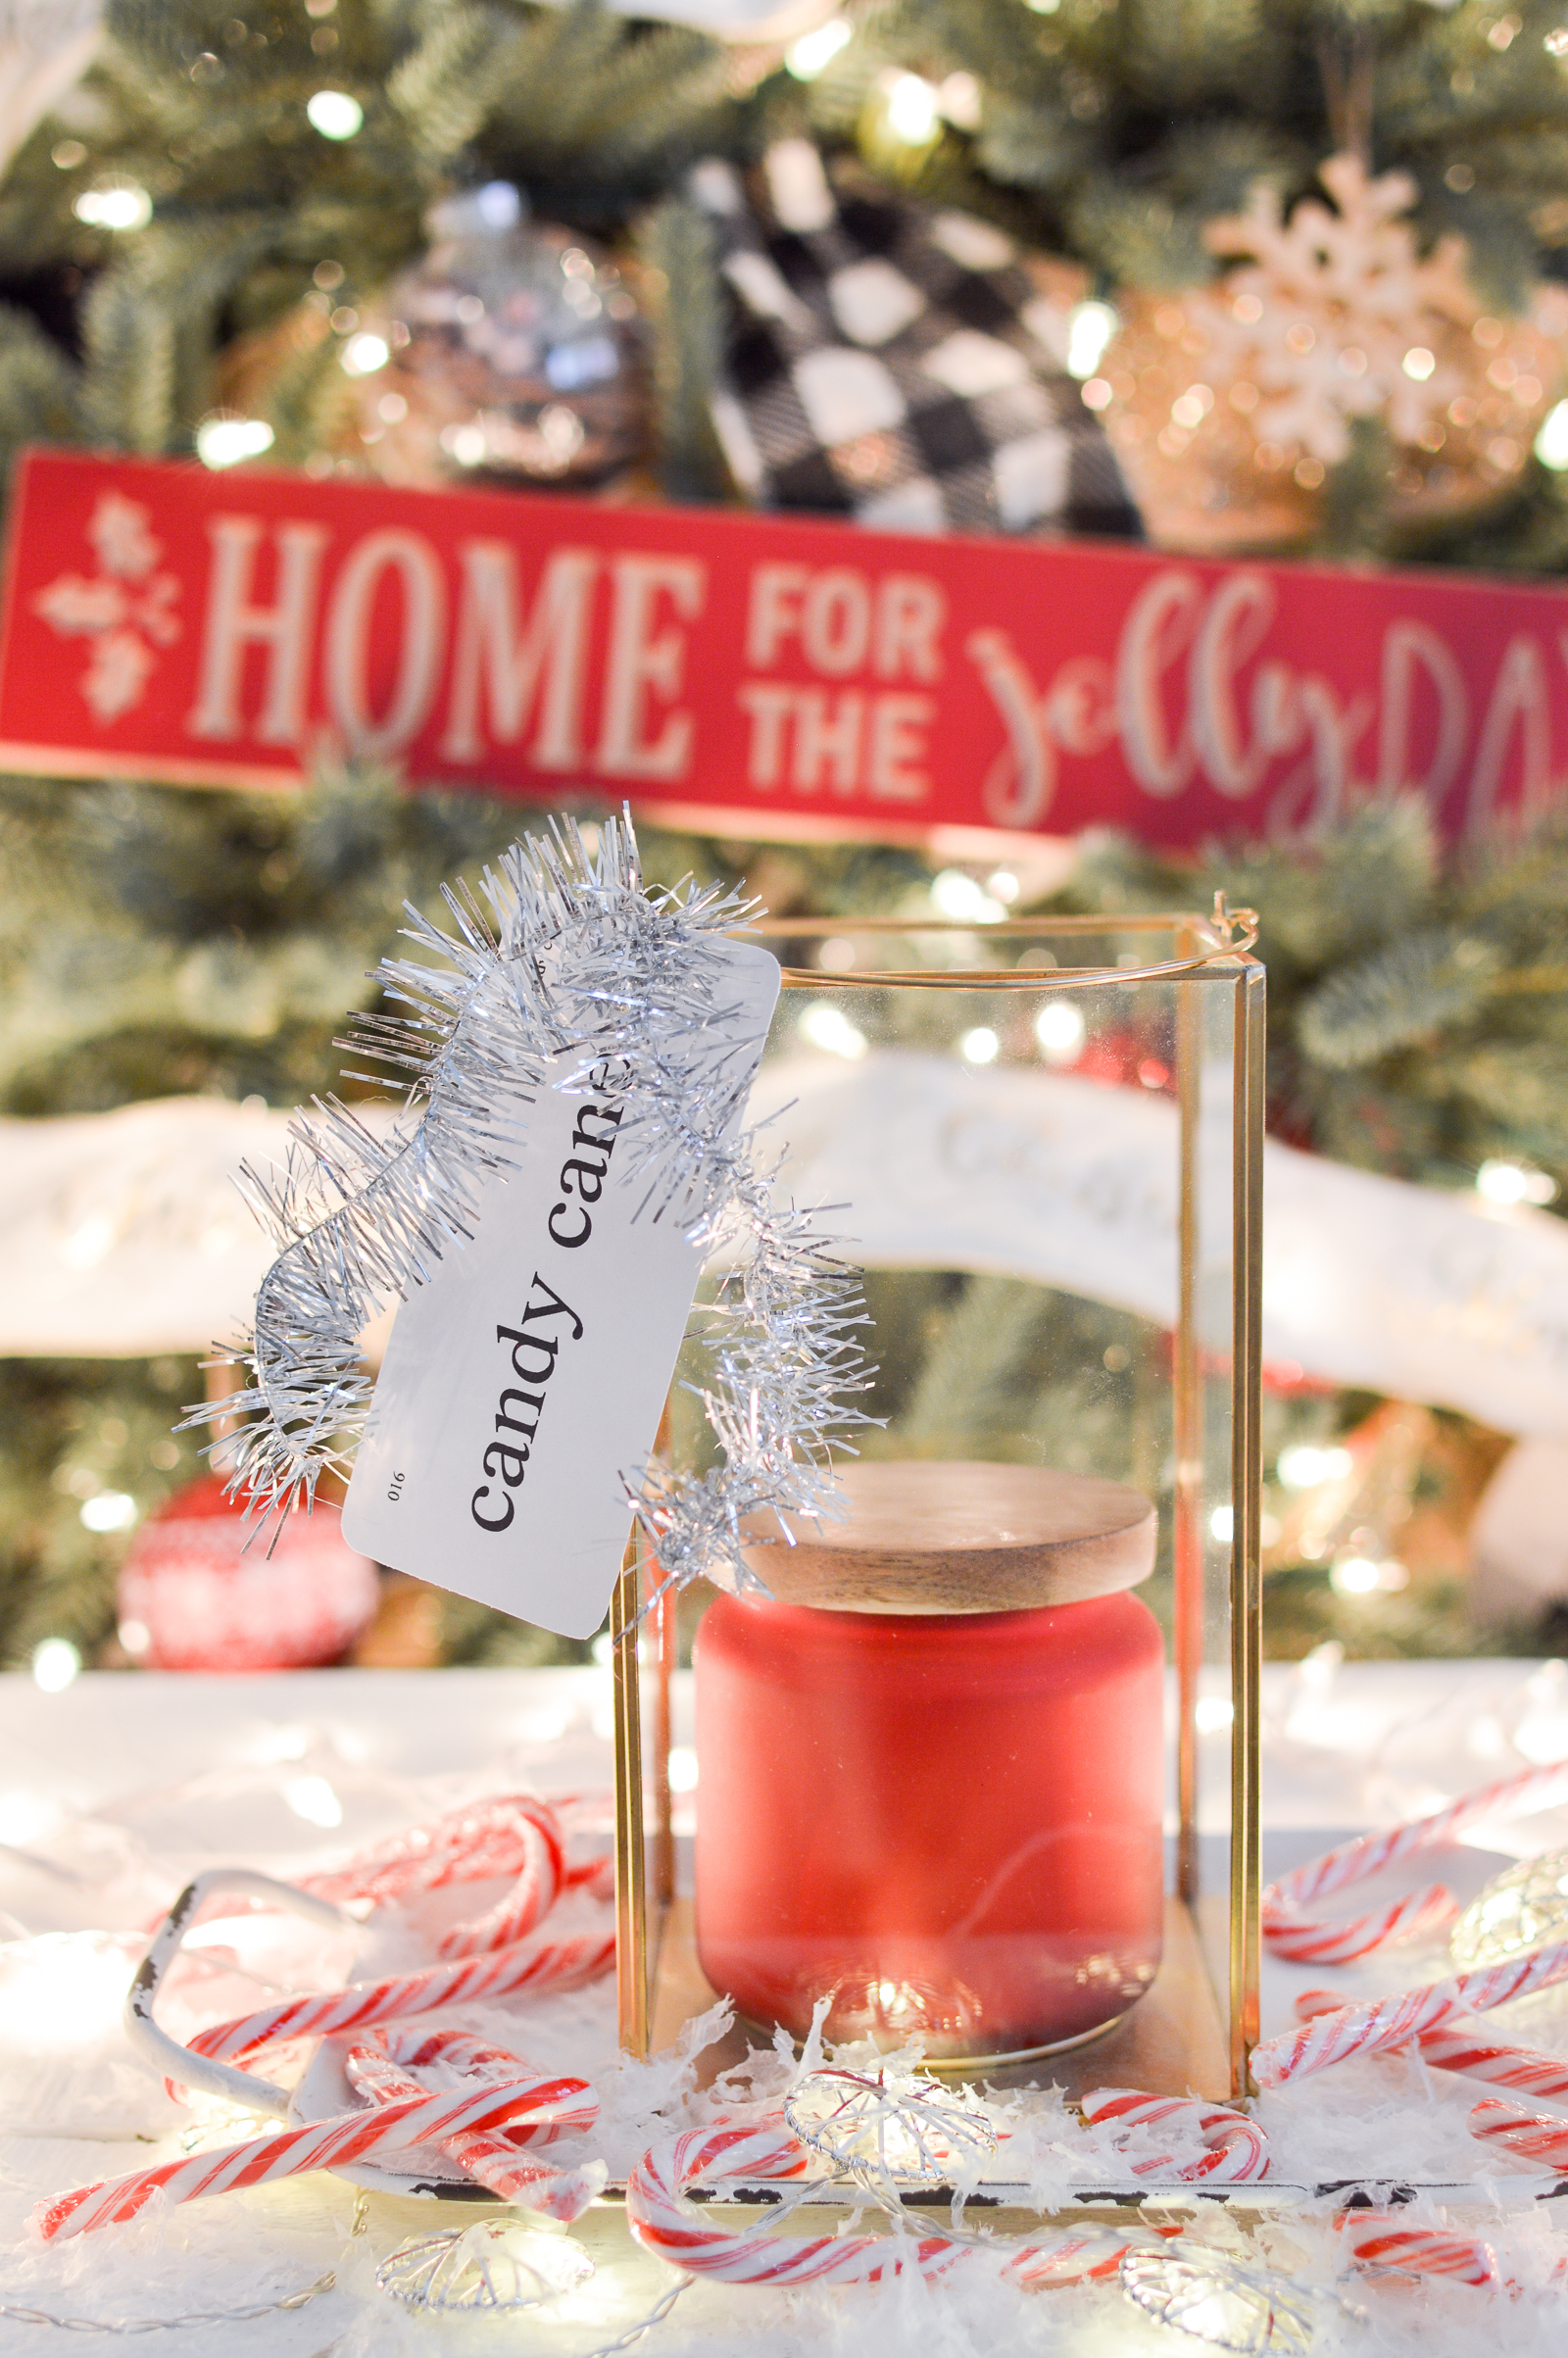 https://foxhollowcottage.com/wp-content/uploads/2018/12/Christmas-Home-Decor-Gift-Ideas-Under-25-sponsored-with-Better-Homes-Gardens-at-Walmart-BHGhowiholiday-Christmas-GiftIdeas-wwwfoxhollowcottage.com-20.jpg